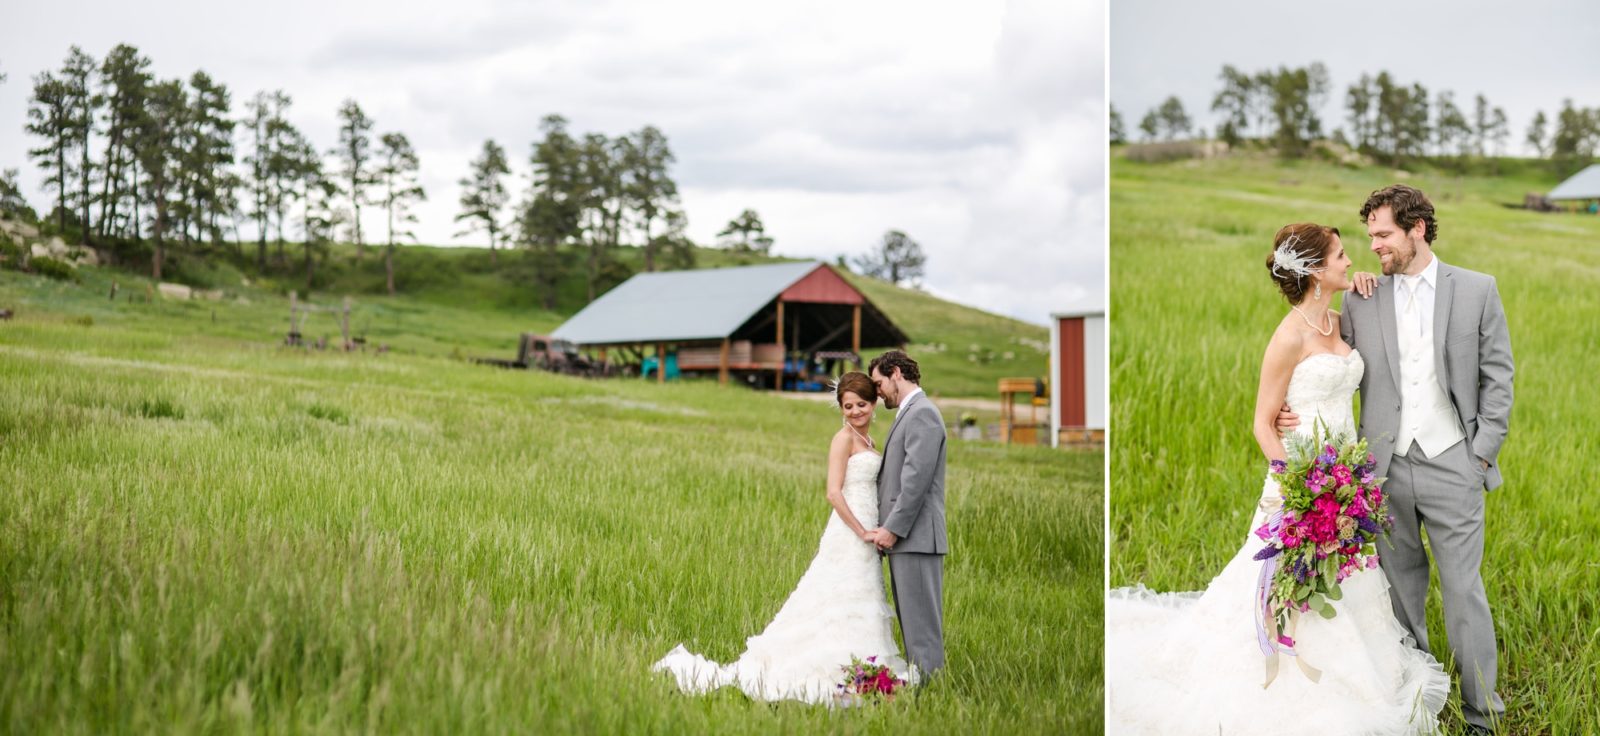 Barn and summer fields for wedding day